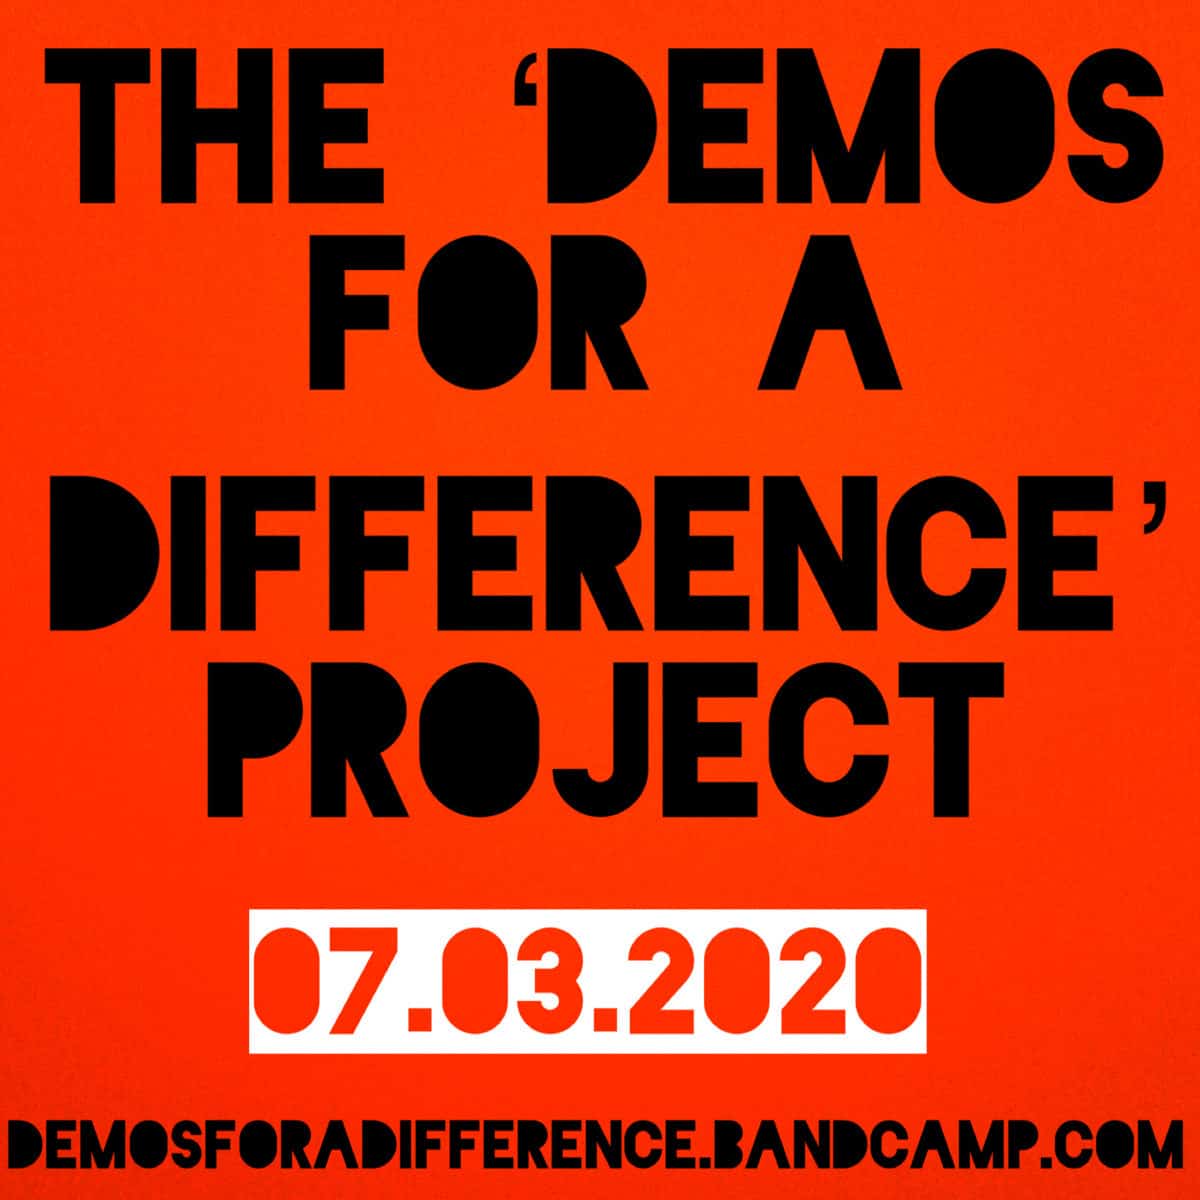 The Demos For A Difference Project Wants Your Music For A Charitable Cause To Be Released On Bandcamp